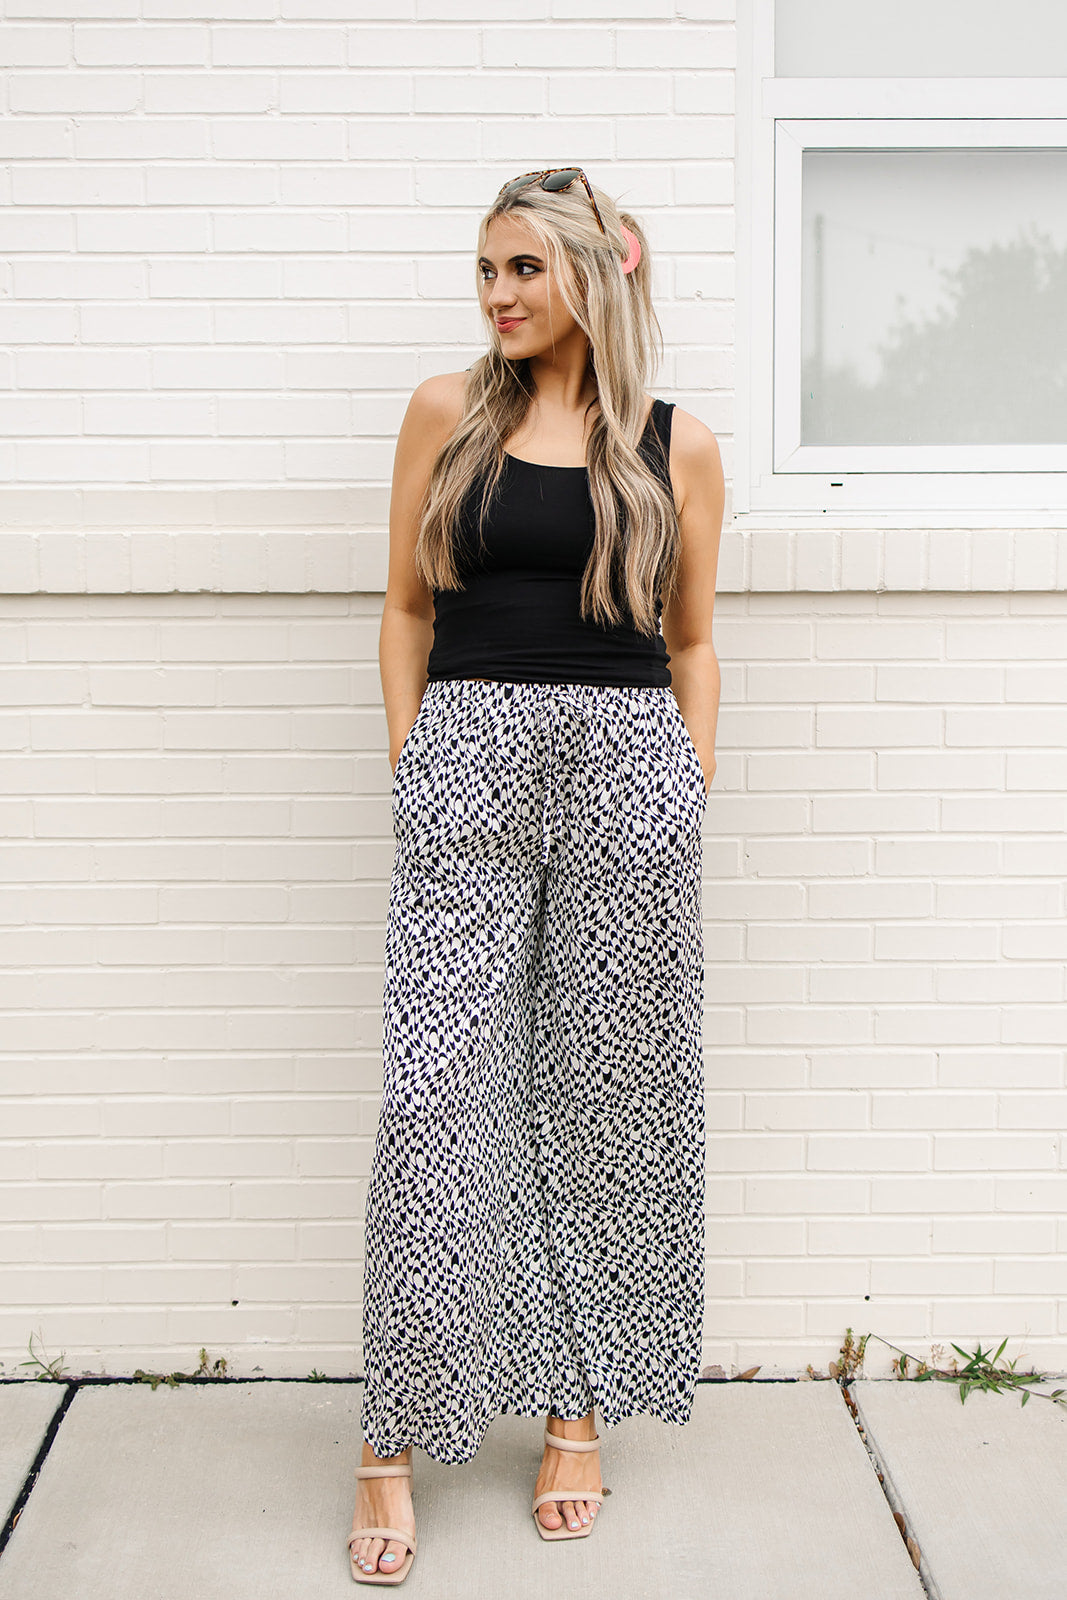 Young And Bold Pants